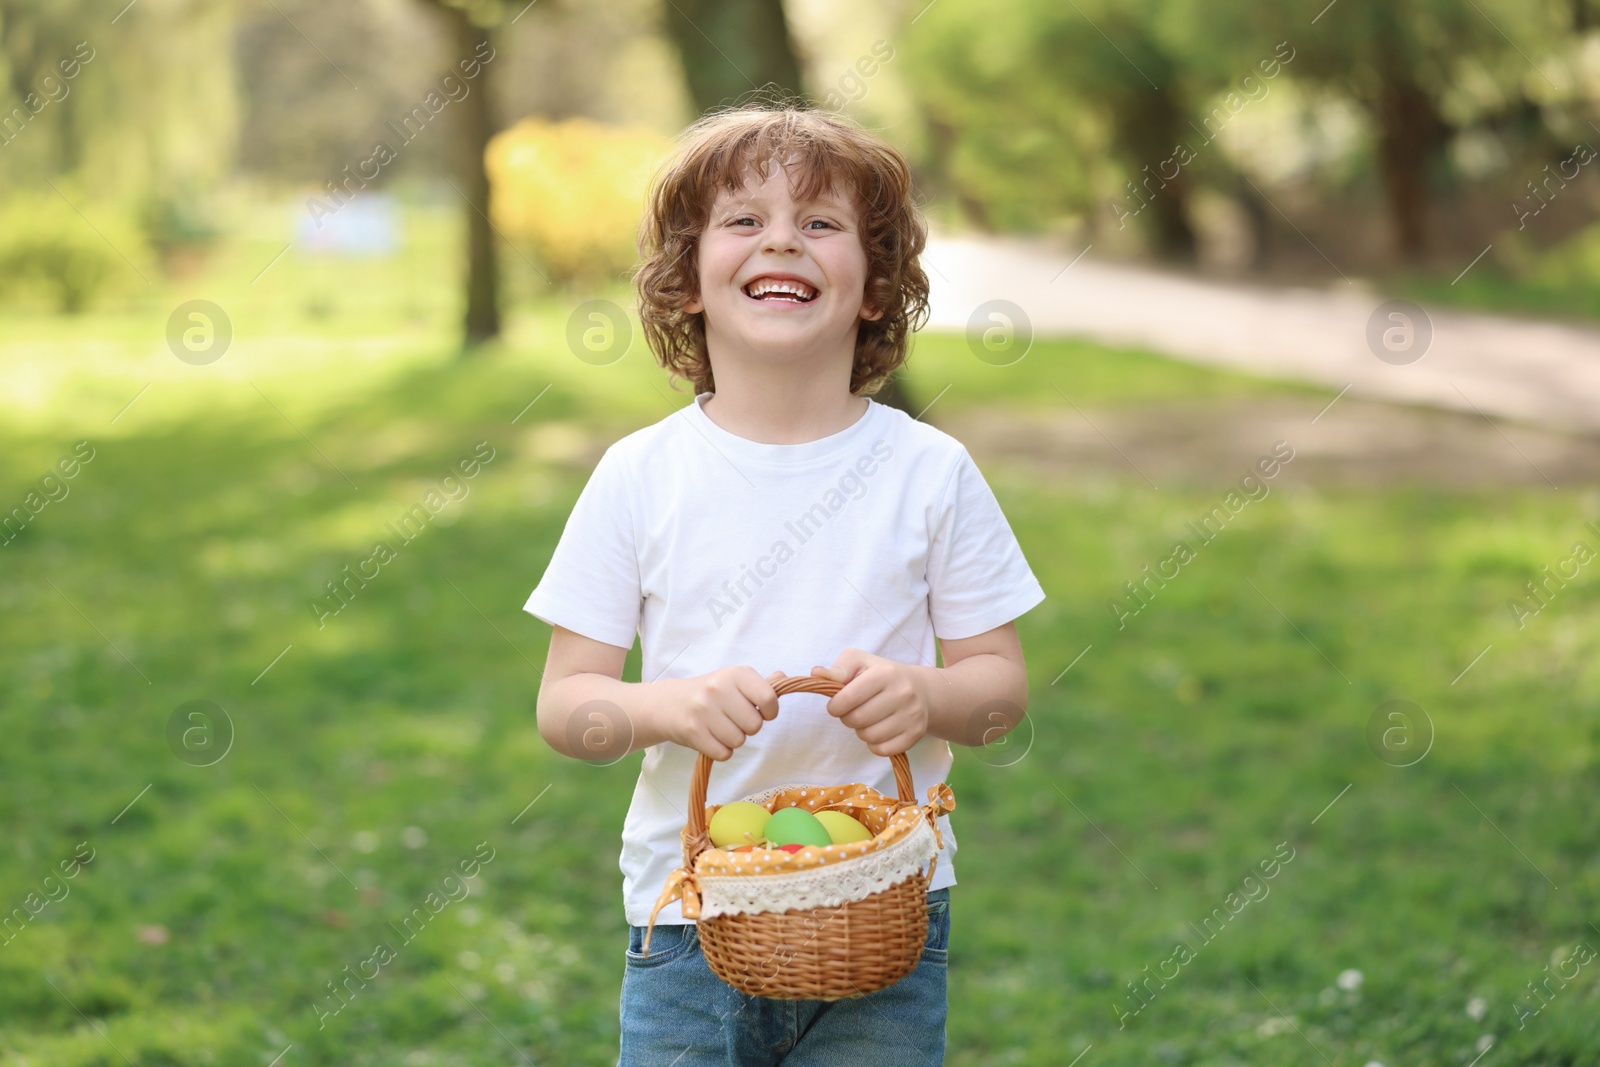 Photo of Easter celebration. Cute little boy holding wicker basket with painted eggs outdoors